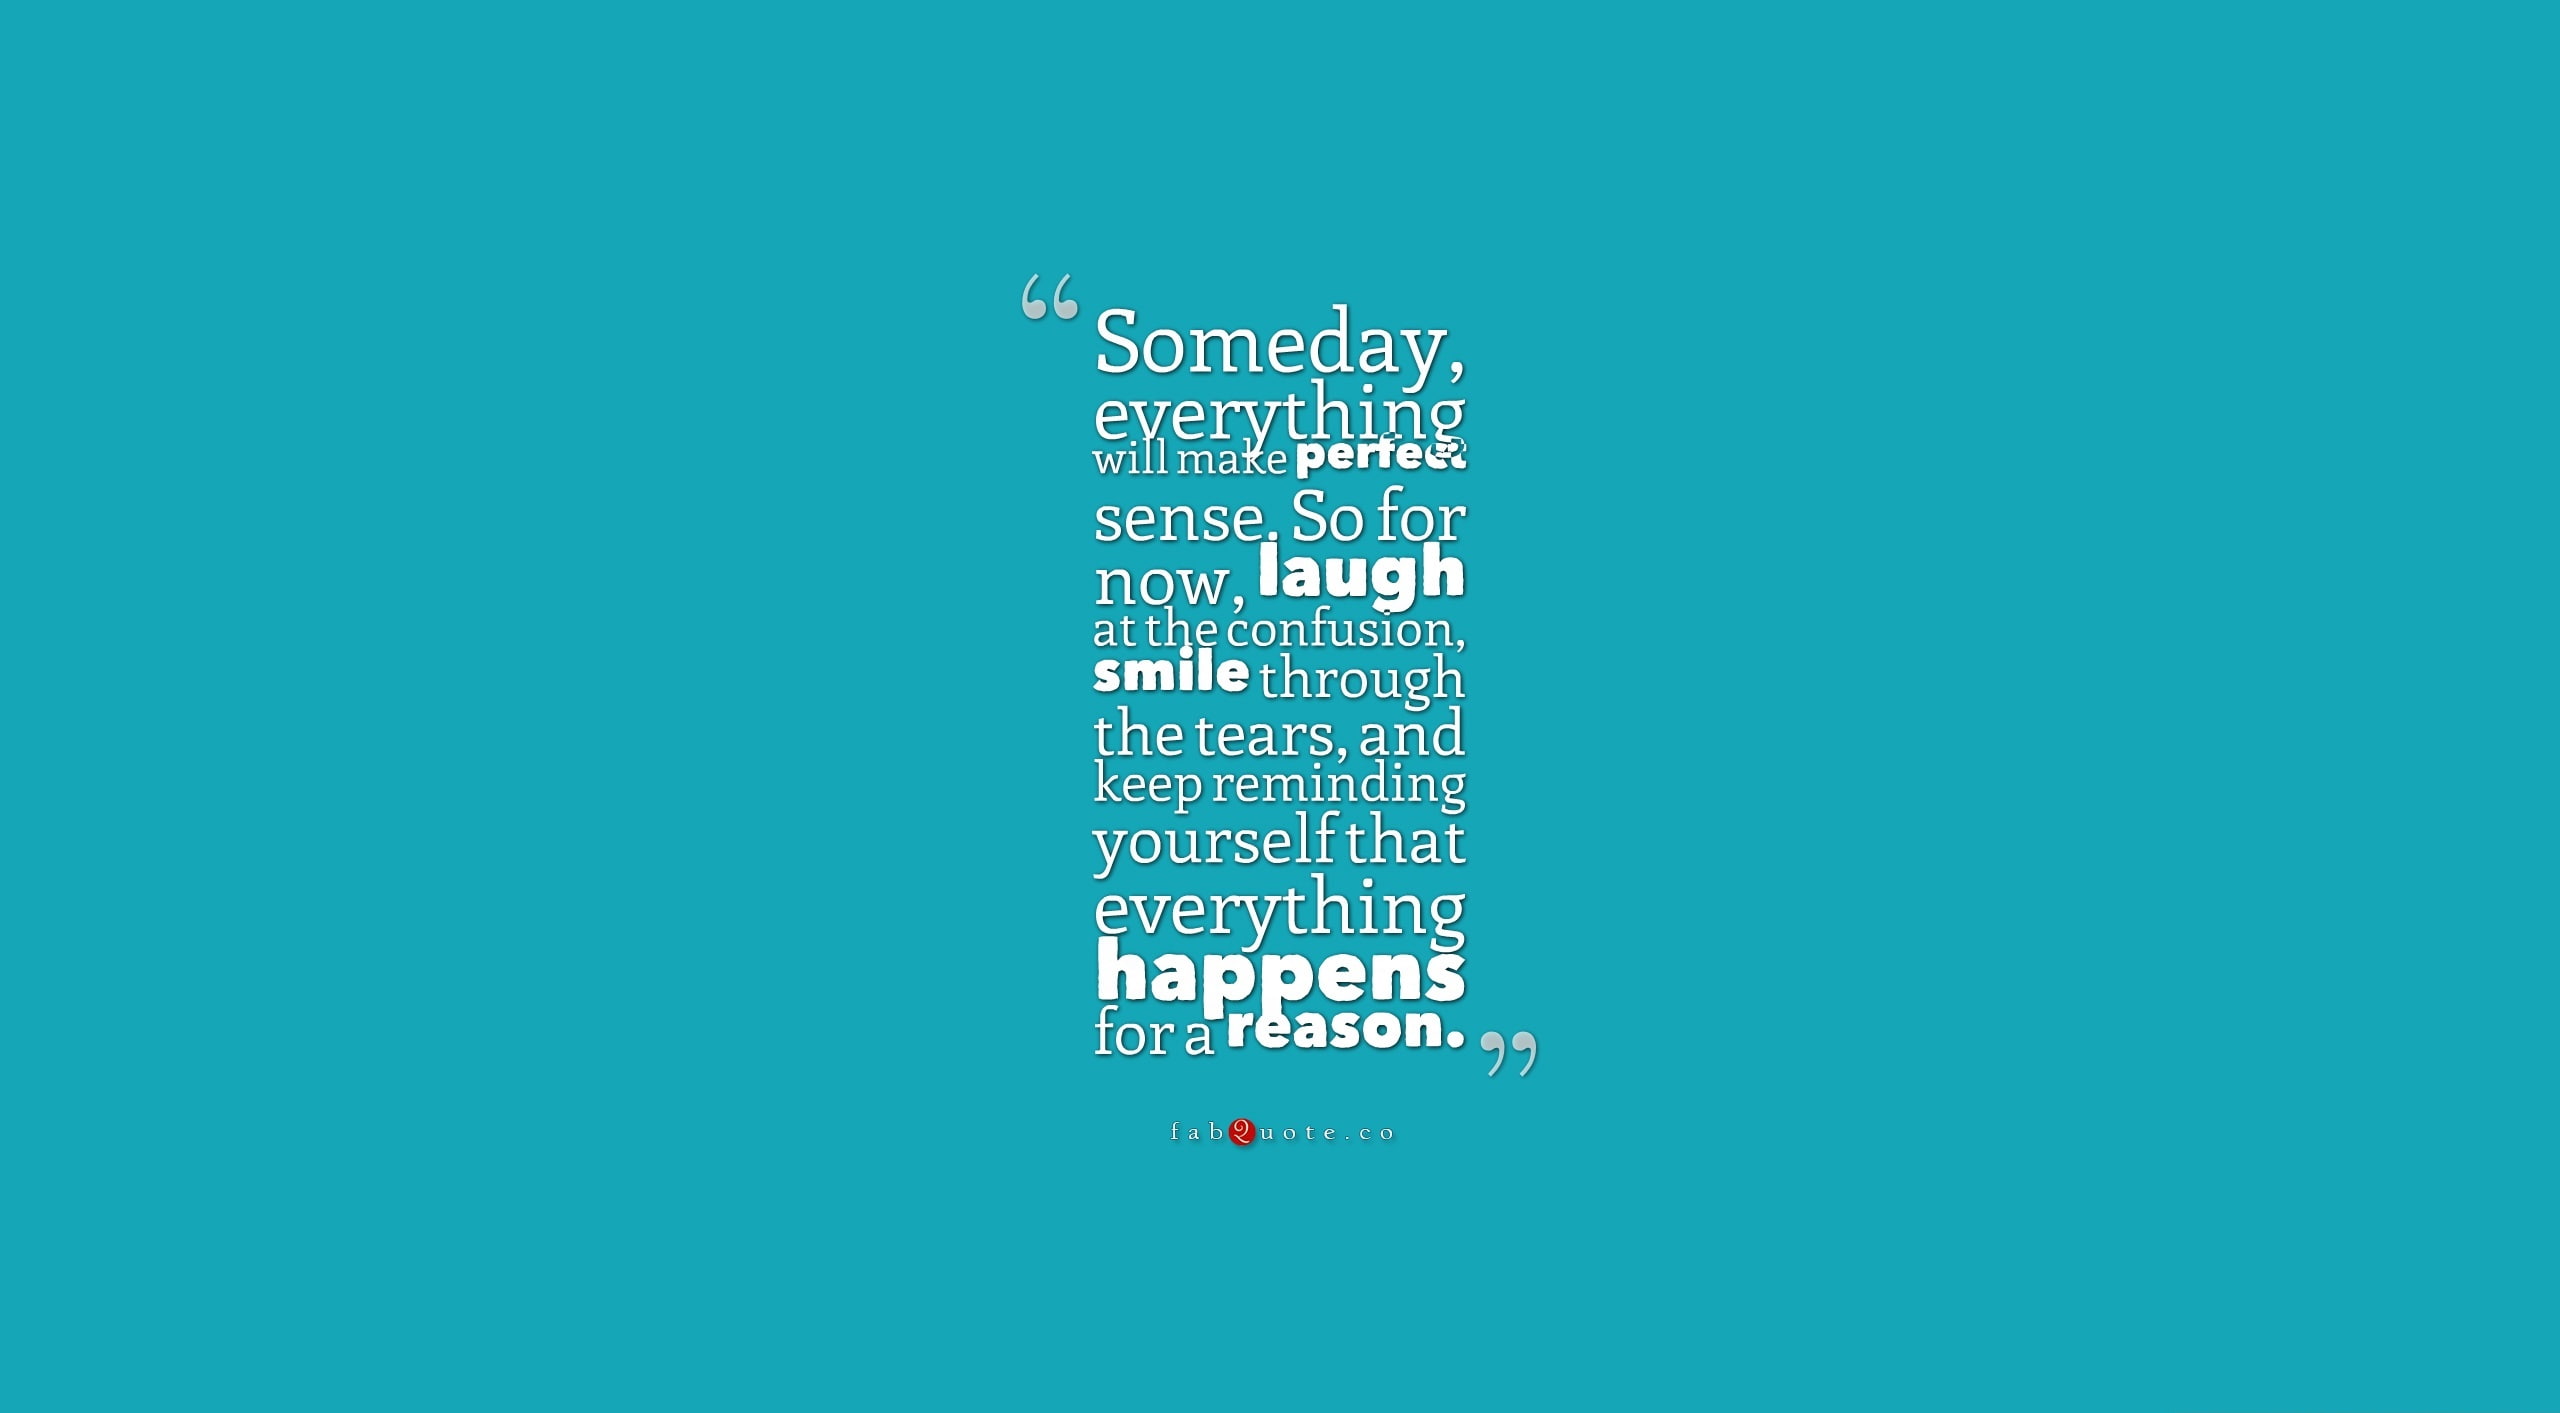 Someday everything will make perfect sense Quote, white and teal text illustration